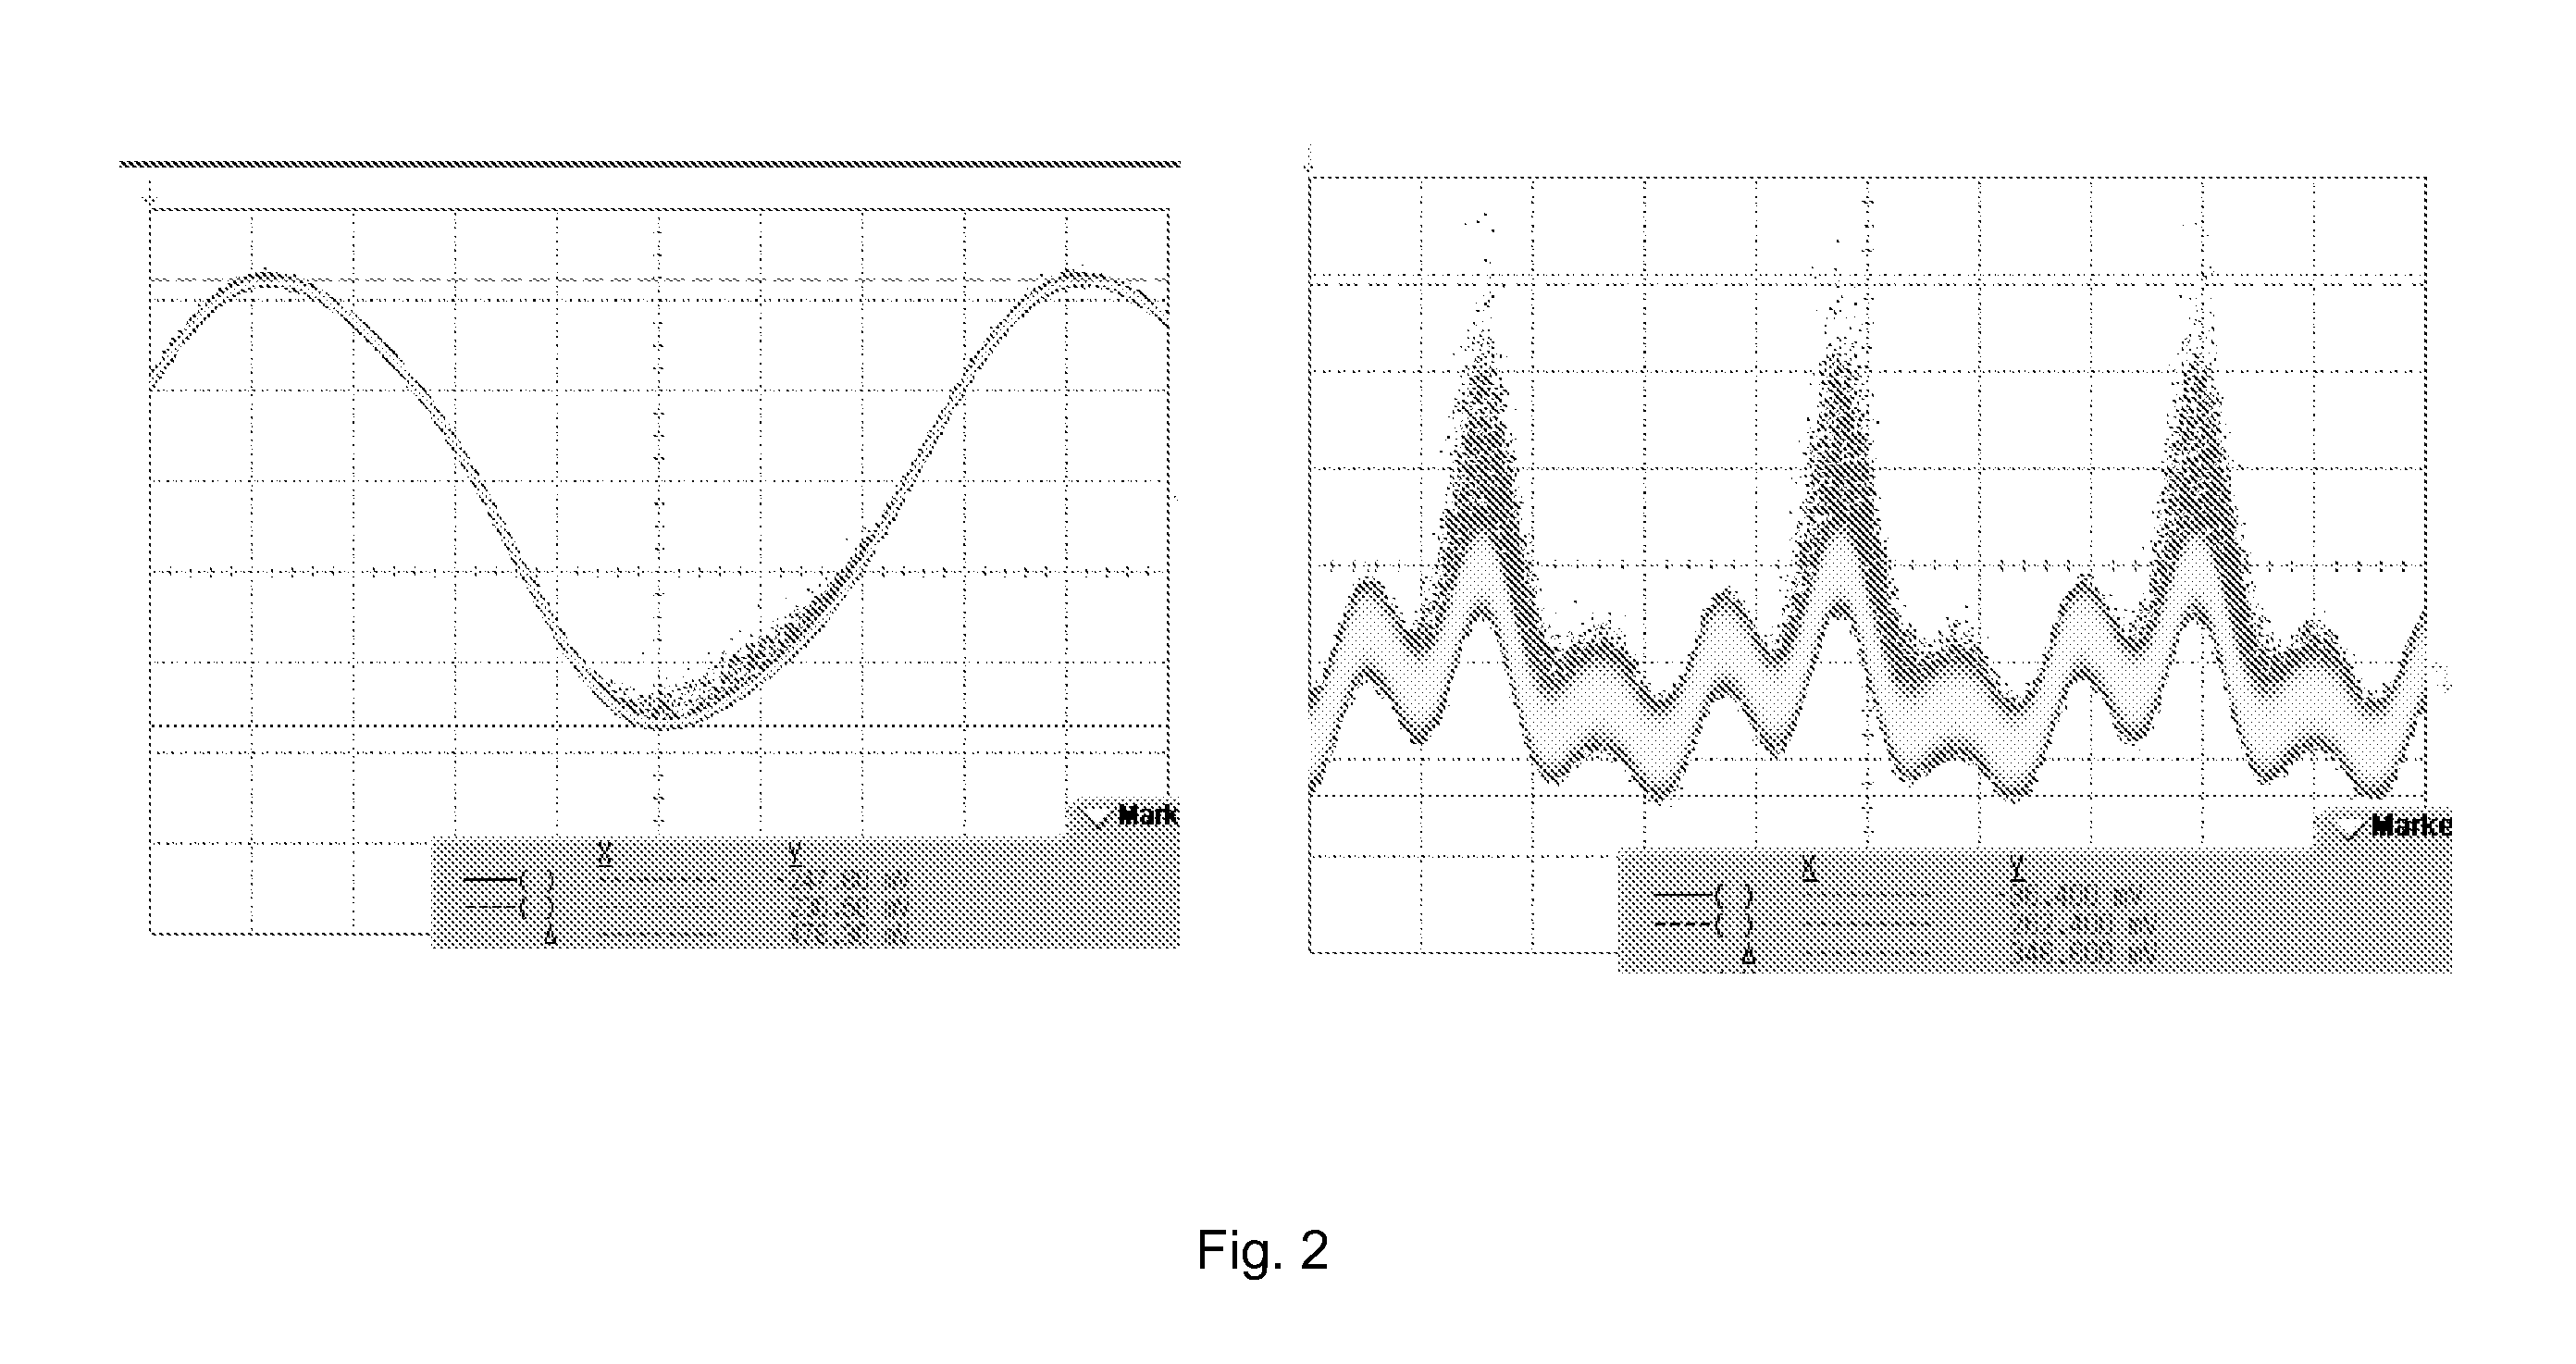 System for controling and calibrating single photon detection devices